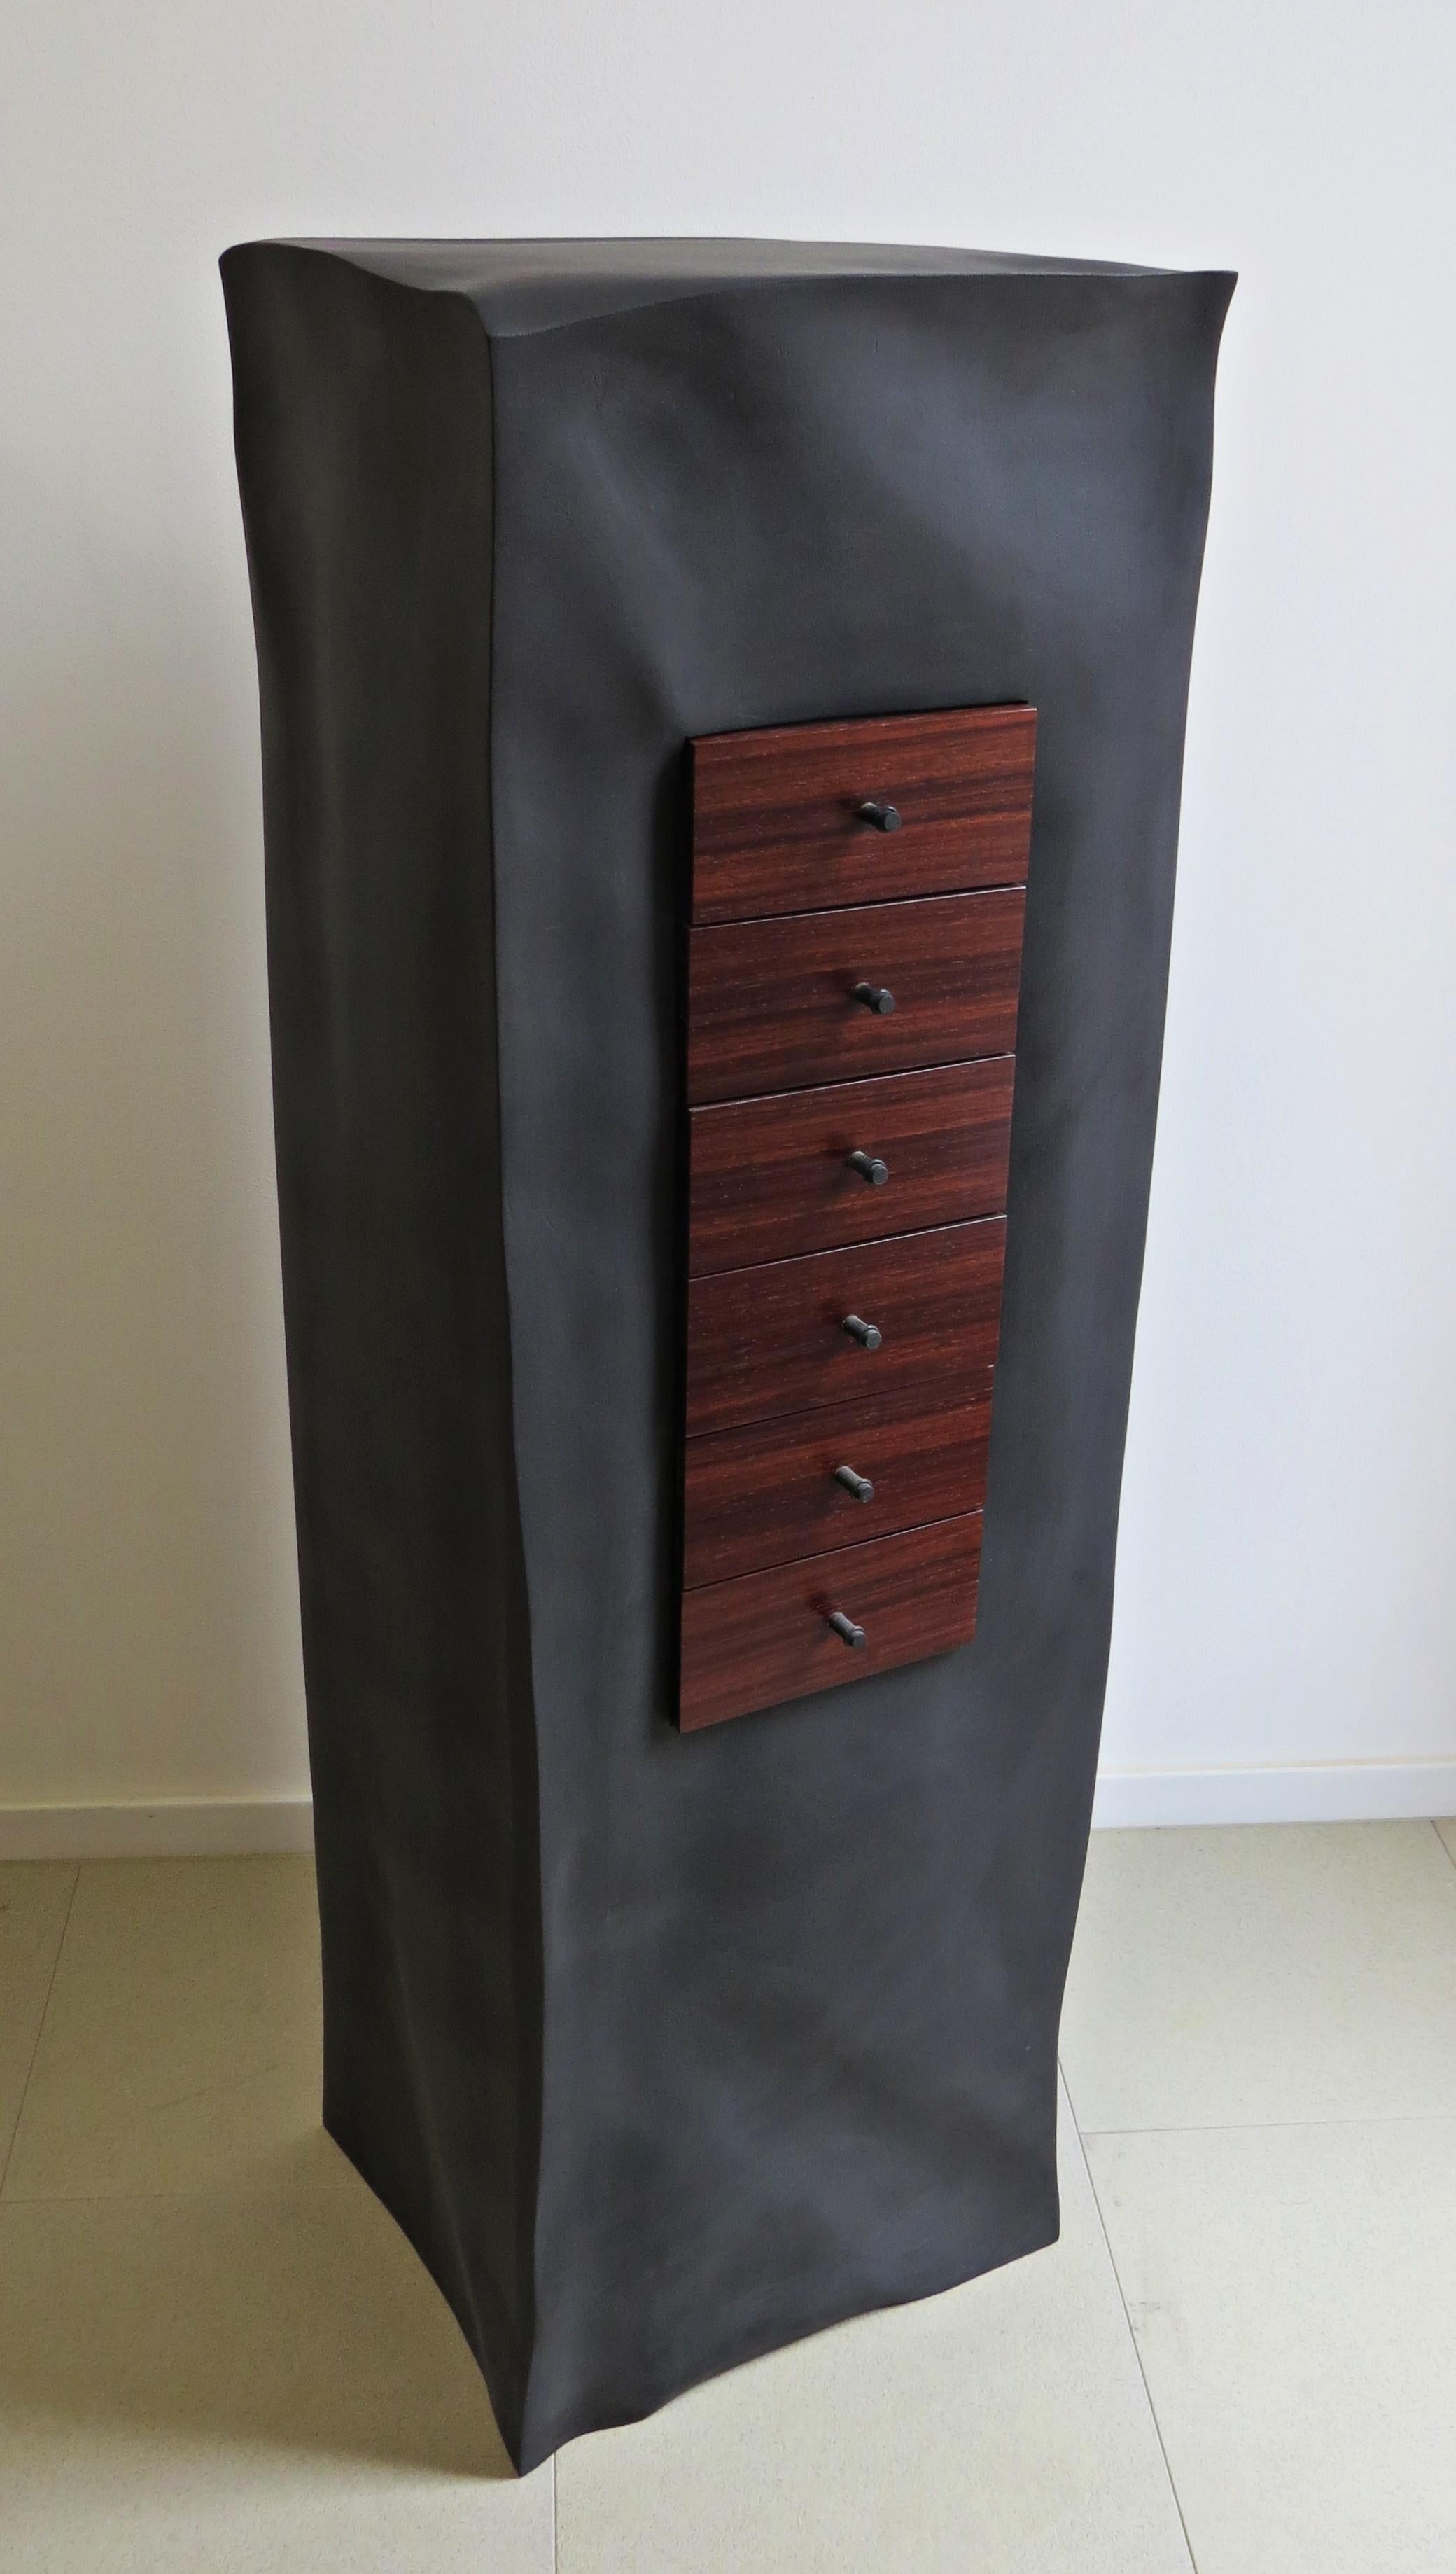 A black body made of plywood, which is organically elaborated with wrinkles and wrinkles sculptural, form the housing.
This is coated with deep matte panelling.
The six mahogany drawers are integrated.